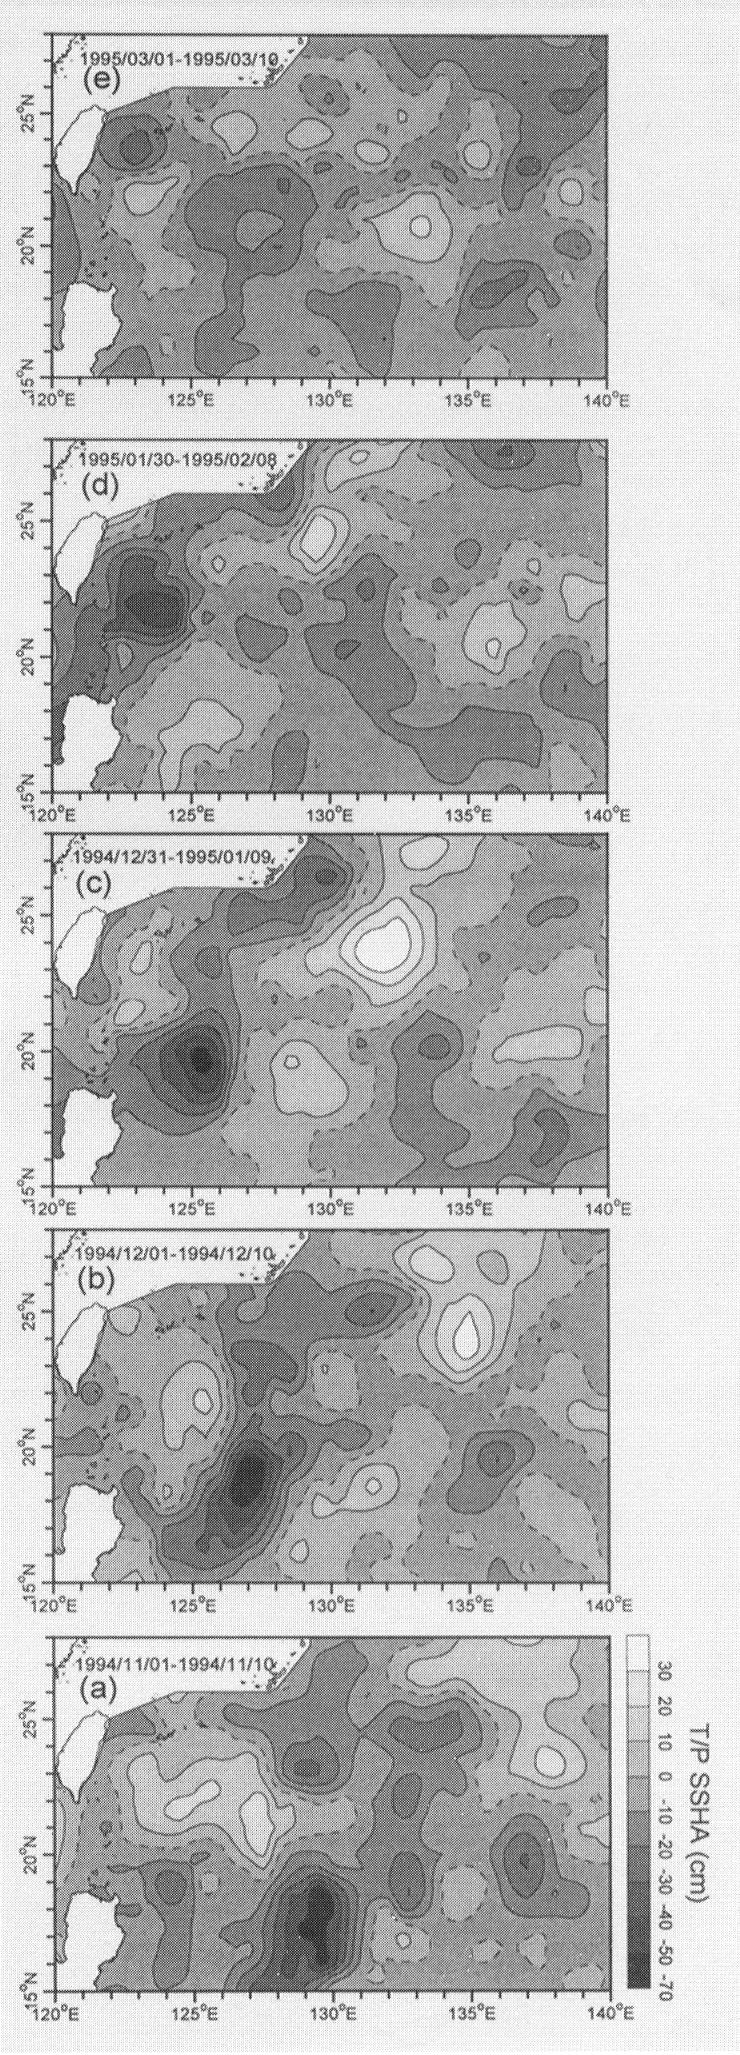 We found that the northwestward propagating cyclonic eddy was responsible for the event of 1995 March. 2.